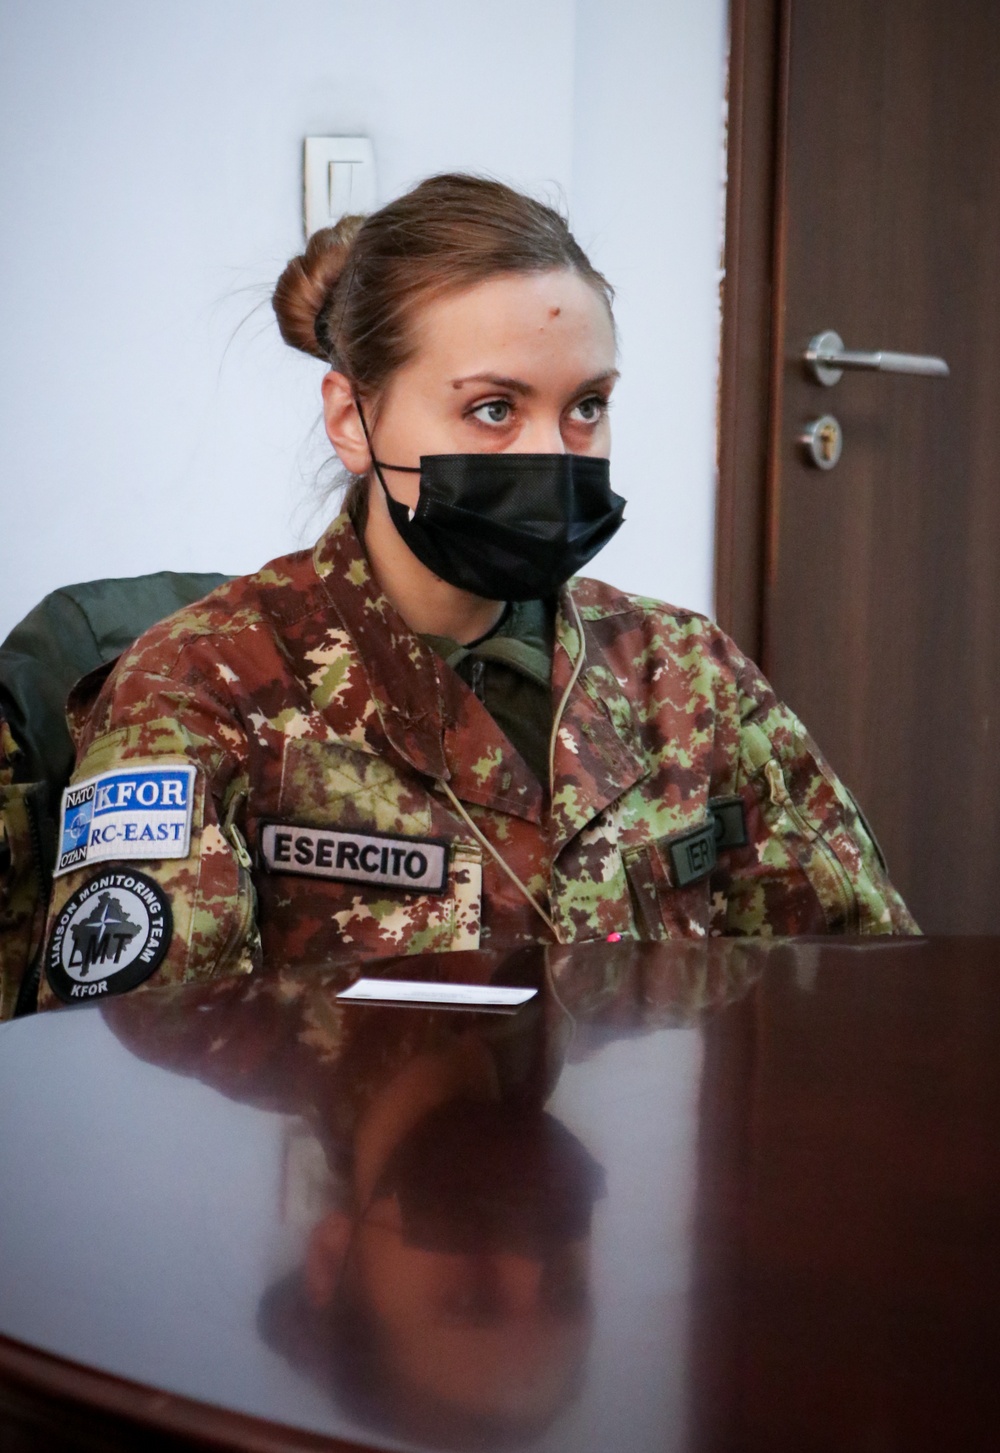 Italian KFOR LMT meets with election official